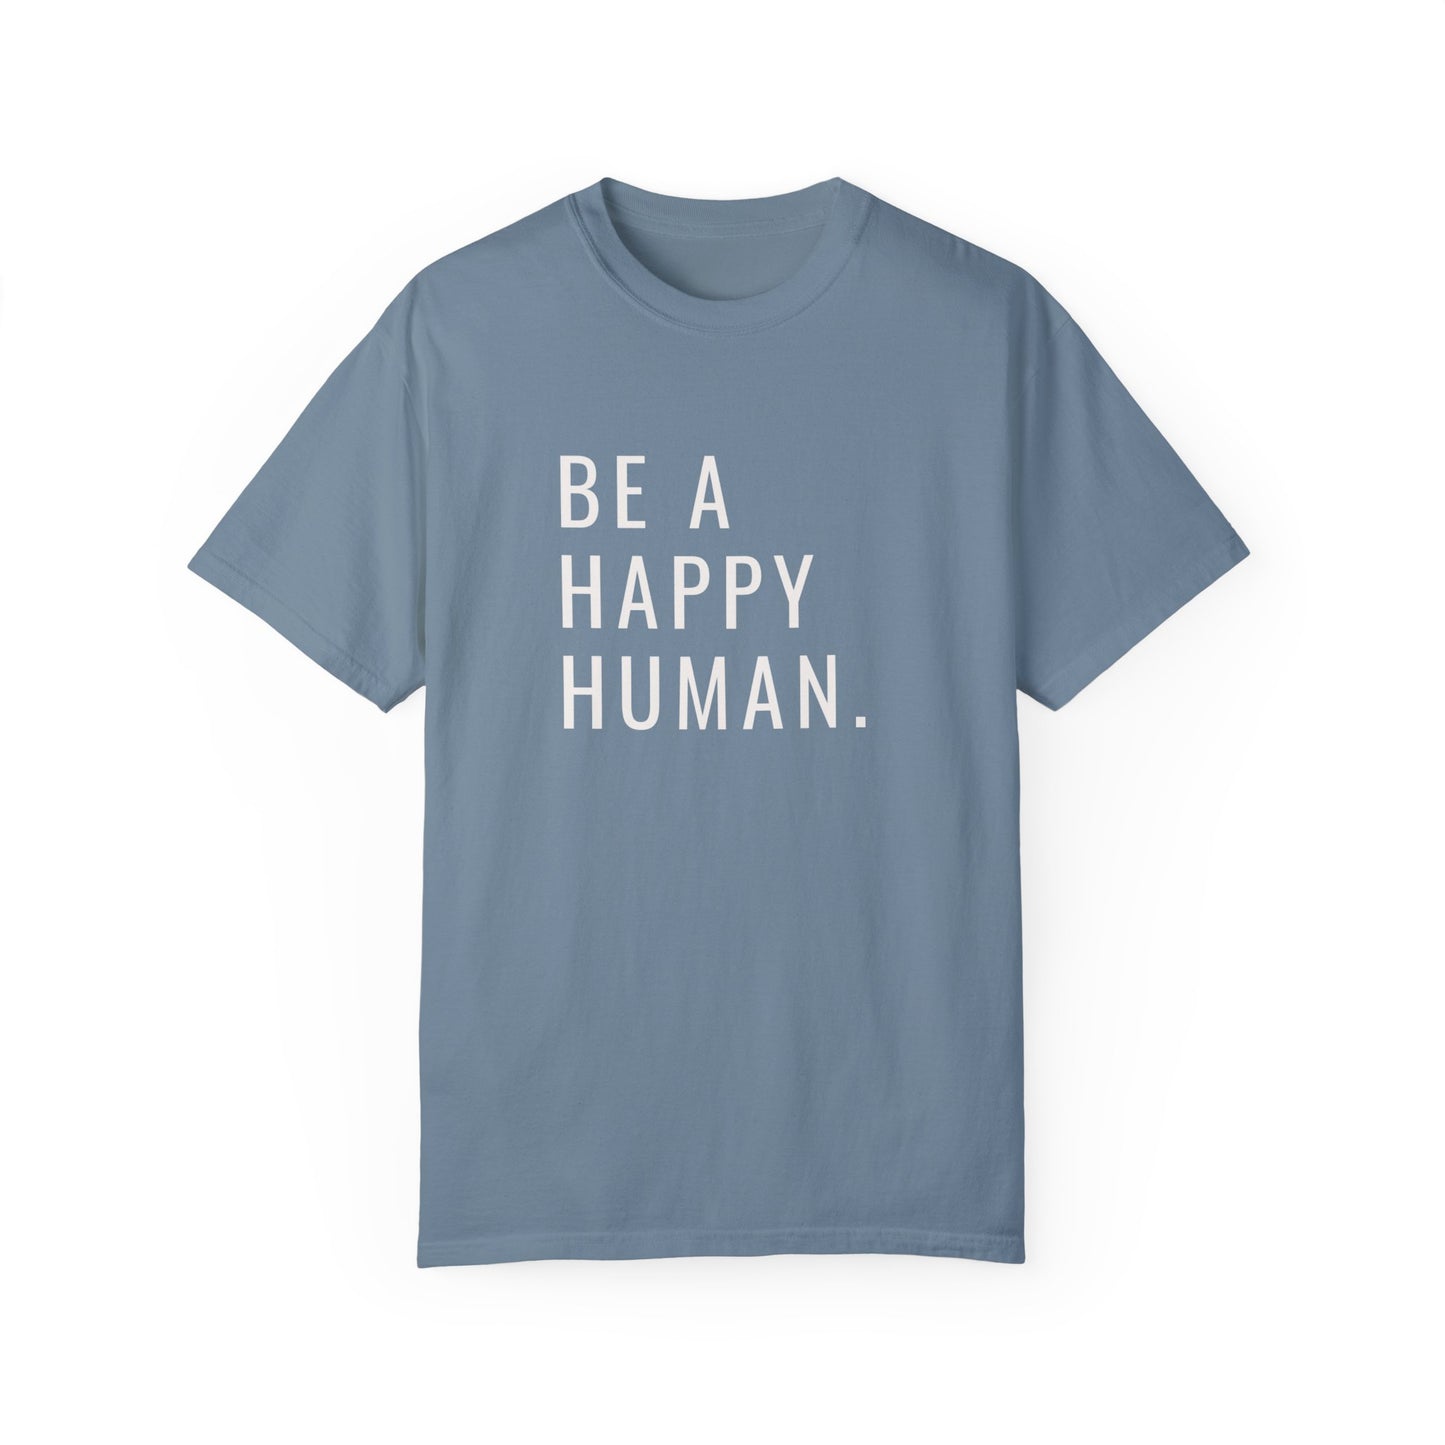 Be A Happy Human. Unisex Garment-Dyed T-shirt